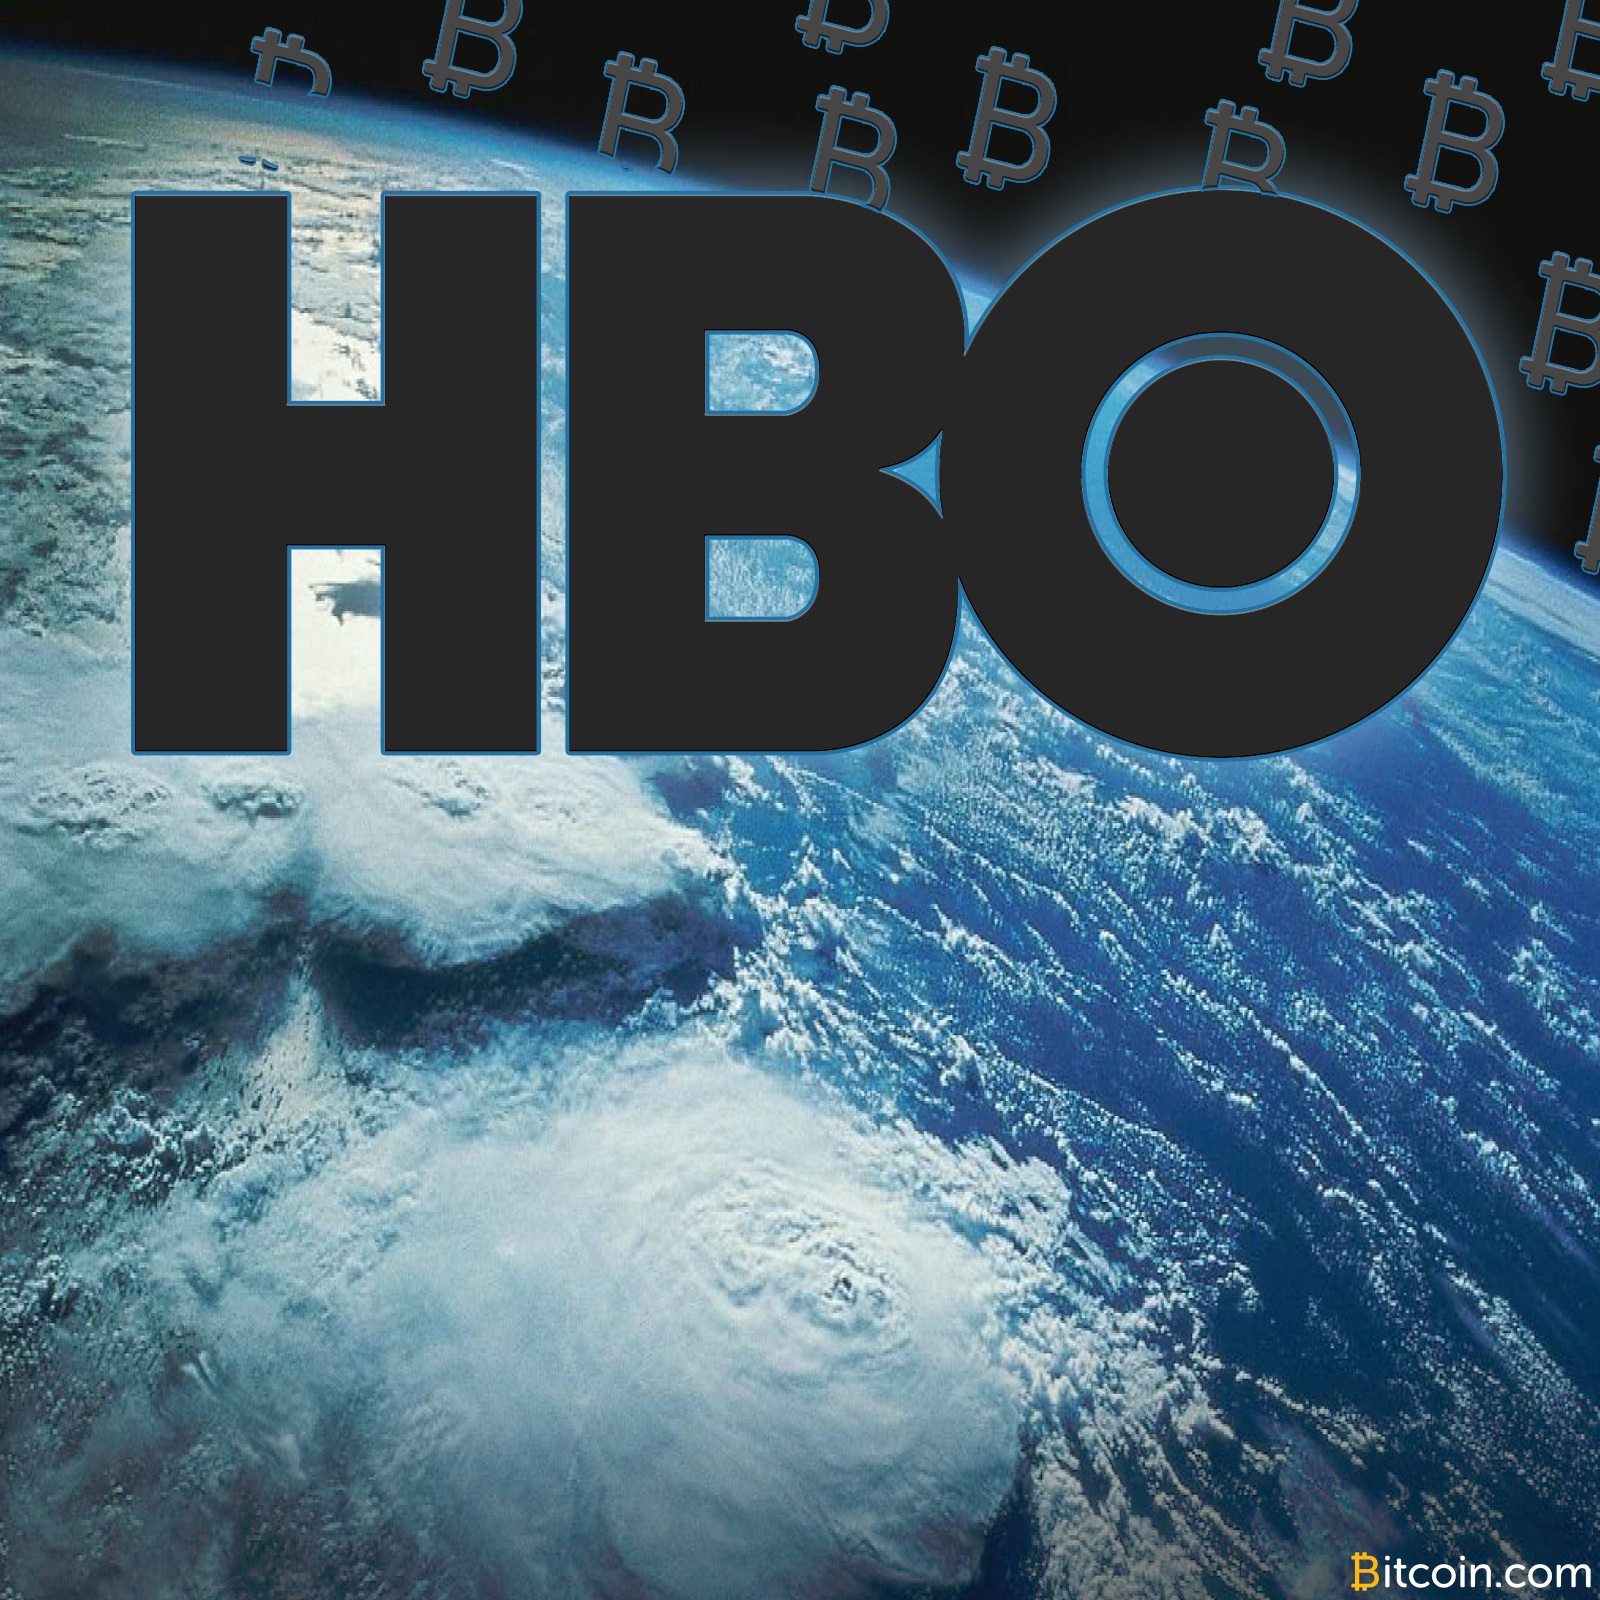 Game of Thrones Hackers Demand $7.5M in Bitcoin From HBO – or Spoiler Alert Galore